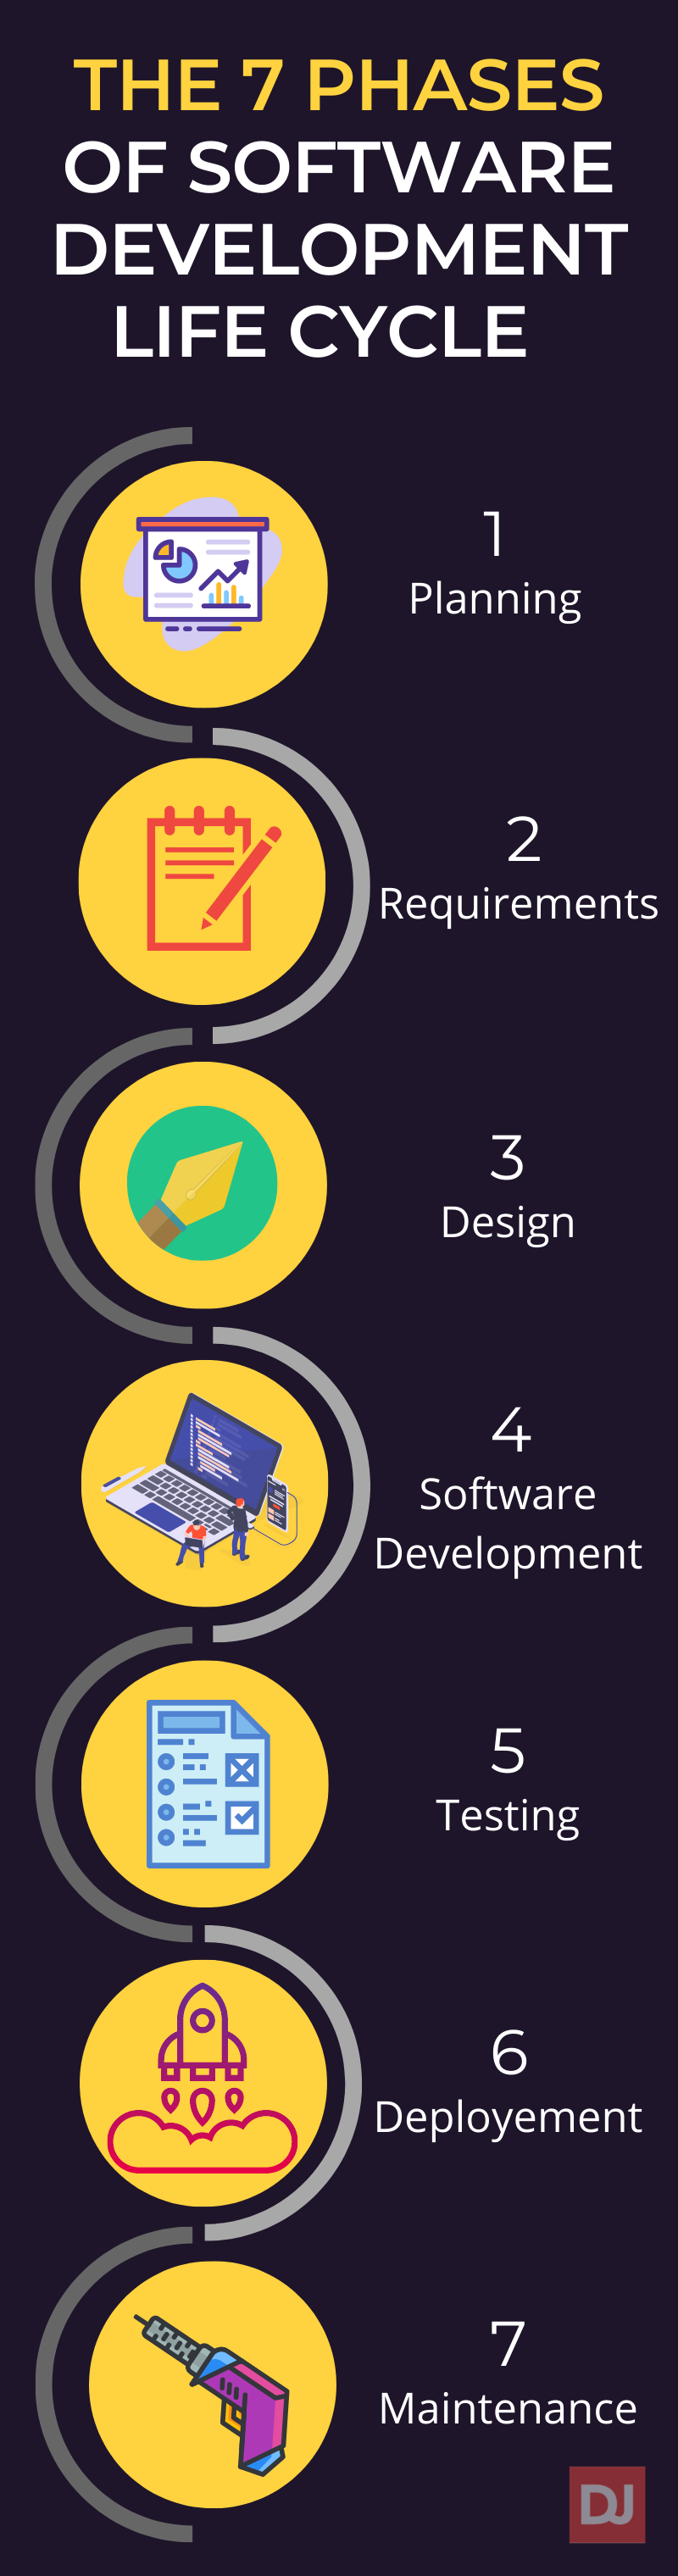 The 7 Phases of Software Development Life Cycle